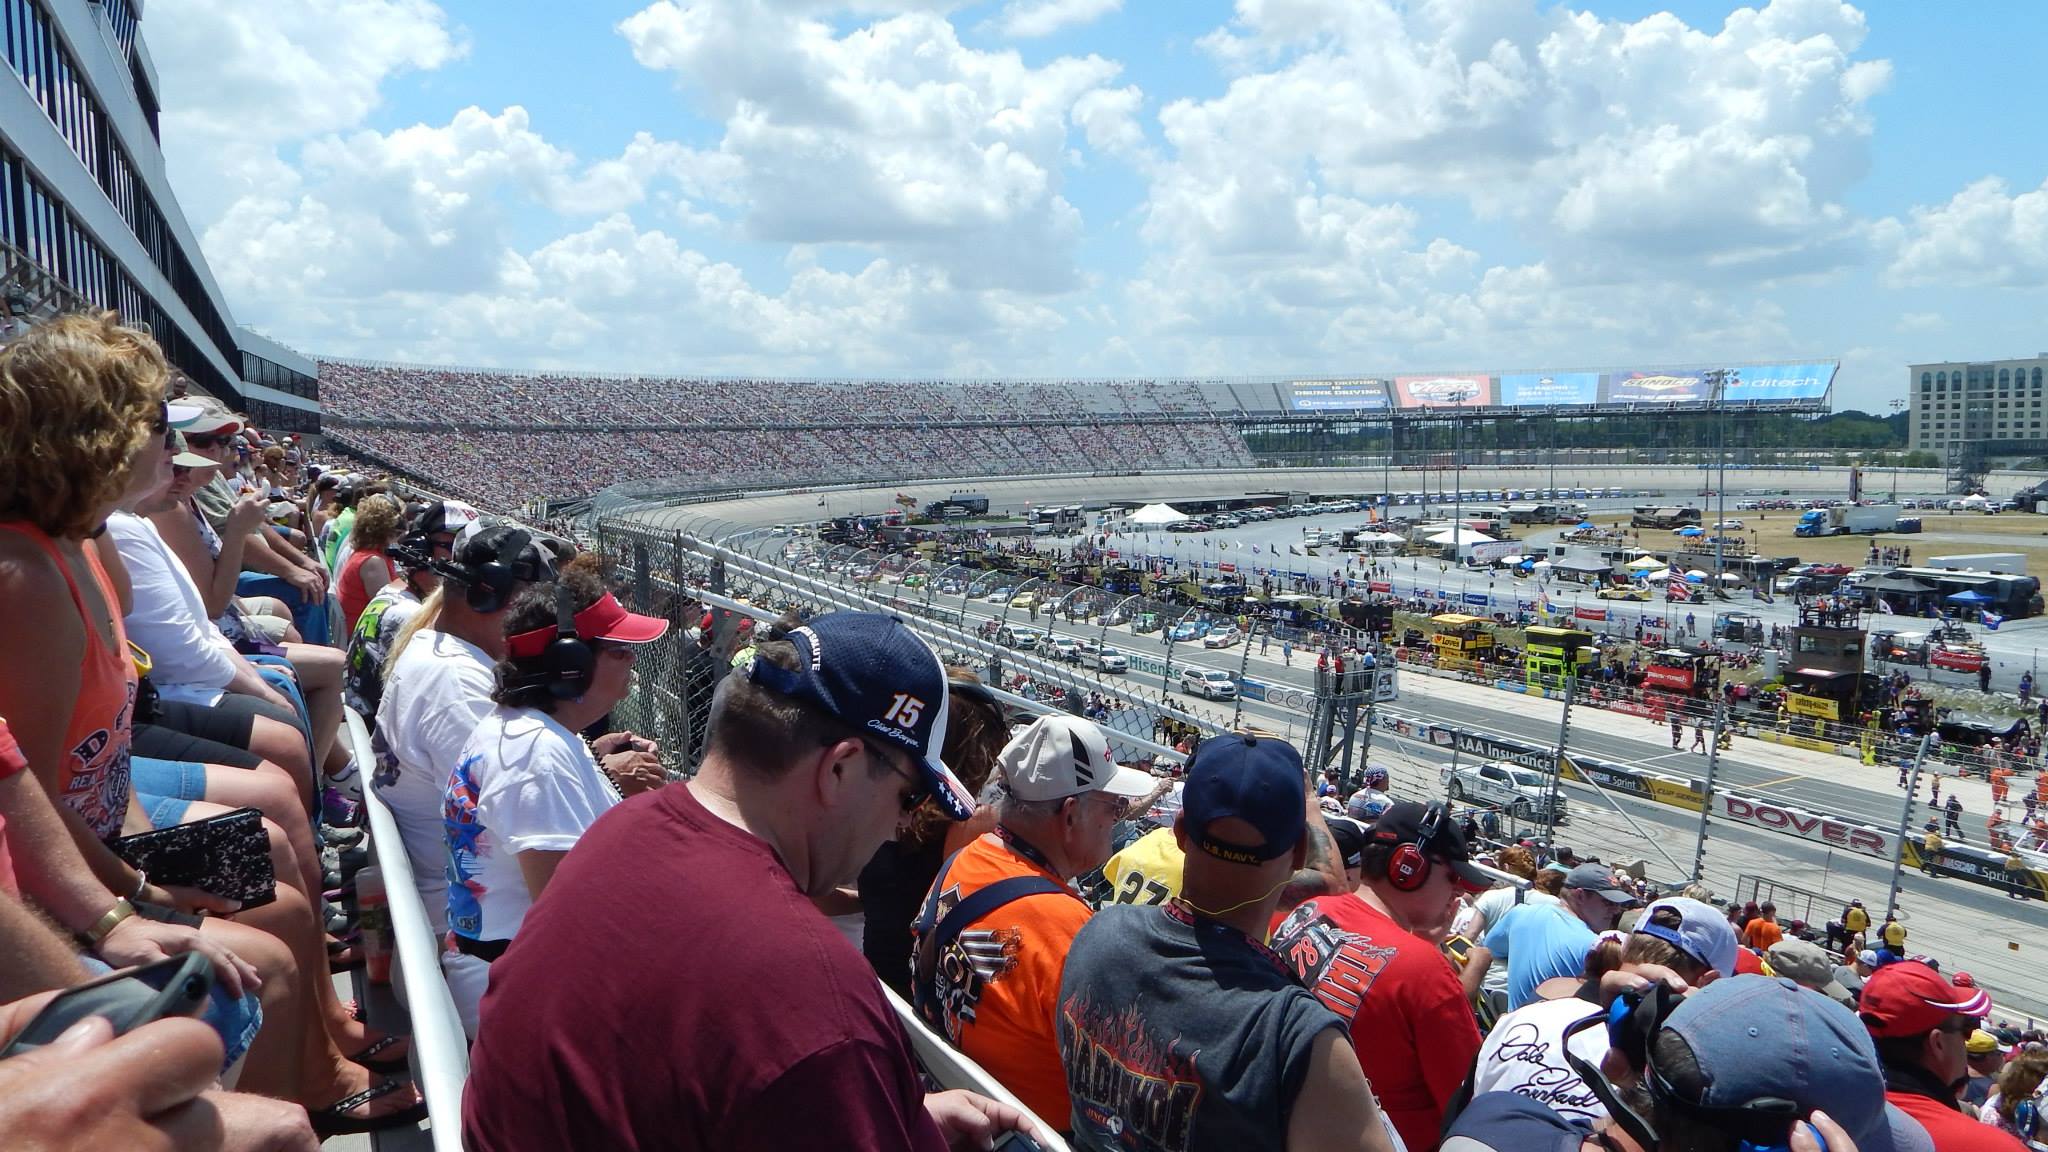 Dover International Speedway section 249 row 42 seat 17 Ex 400